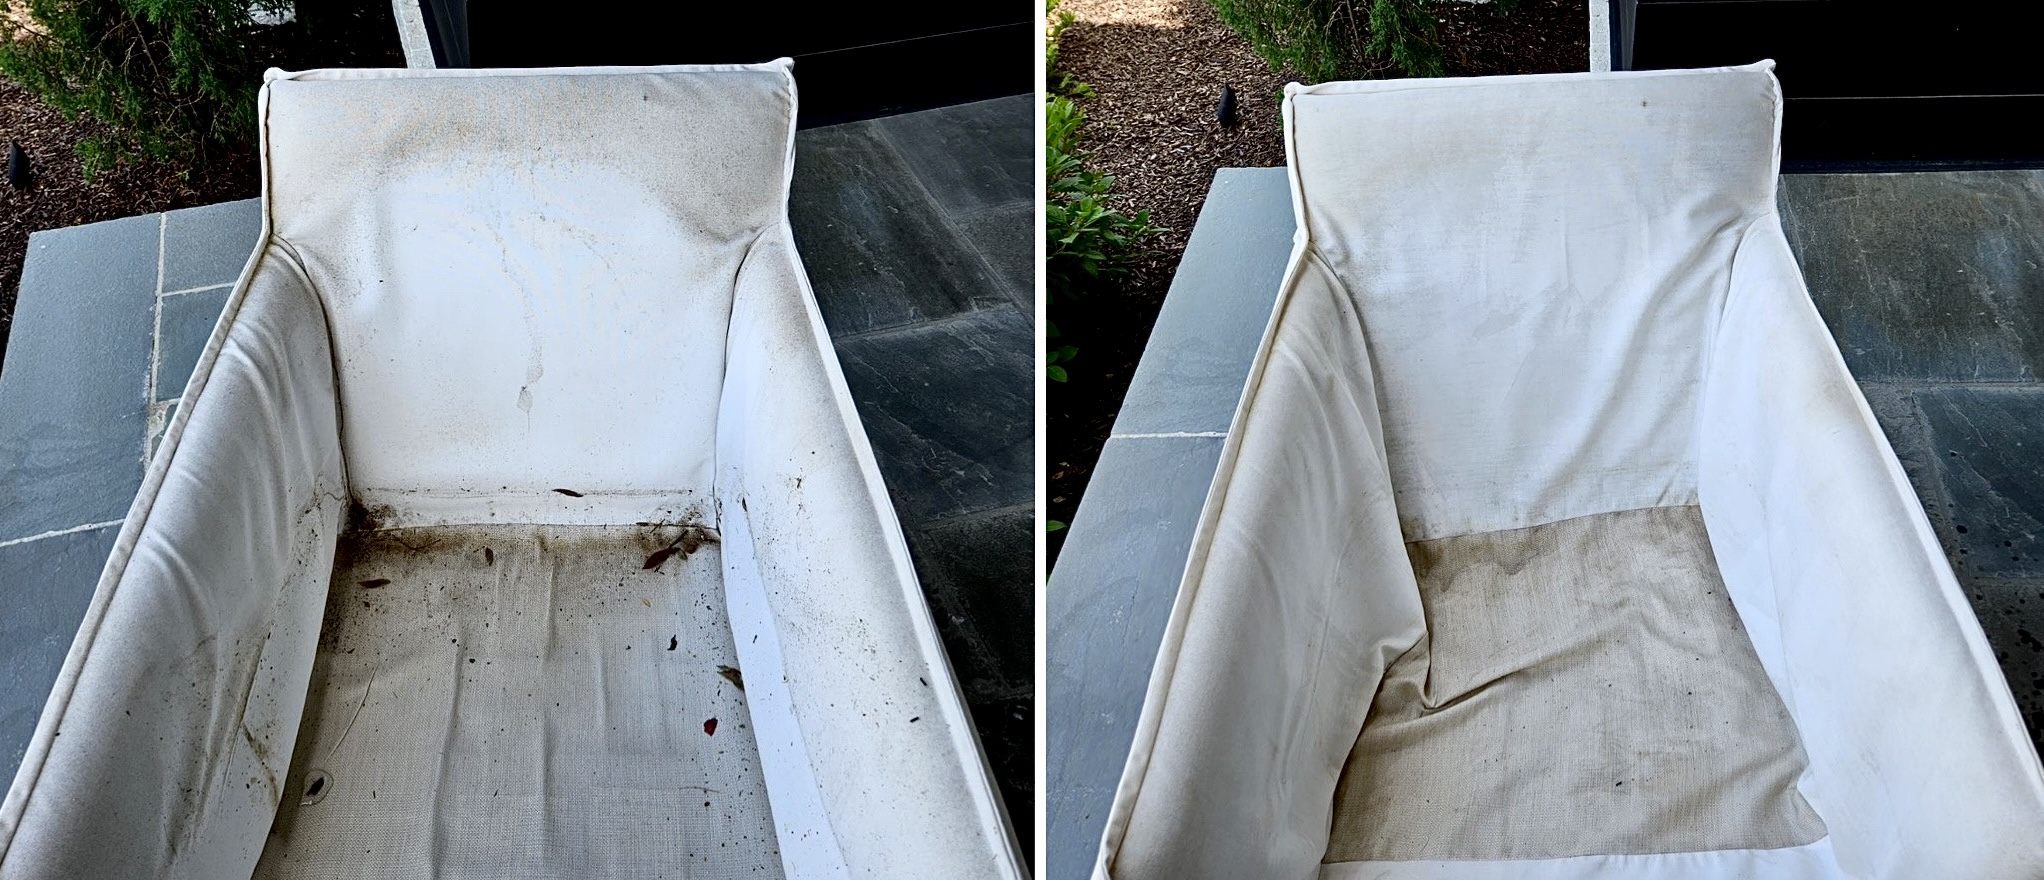 Here's a great example of a performance fabric chair, left in an outdoor setting, before and after cleaning.